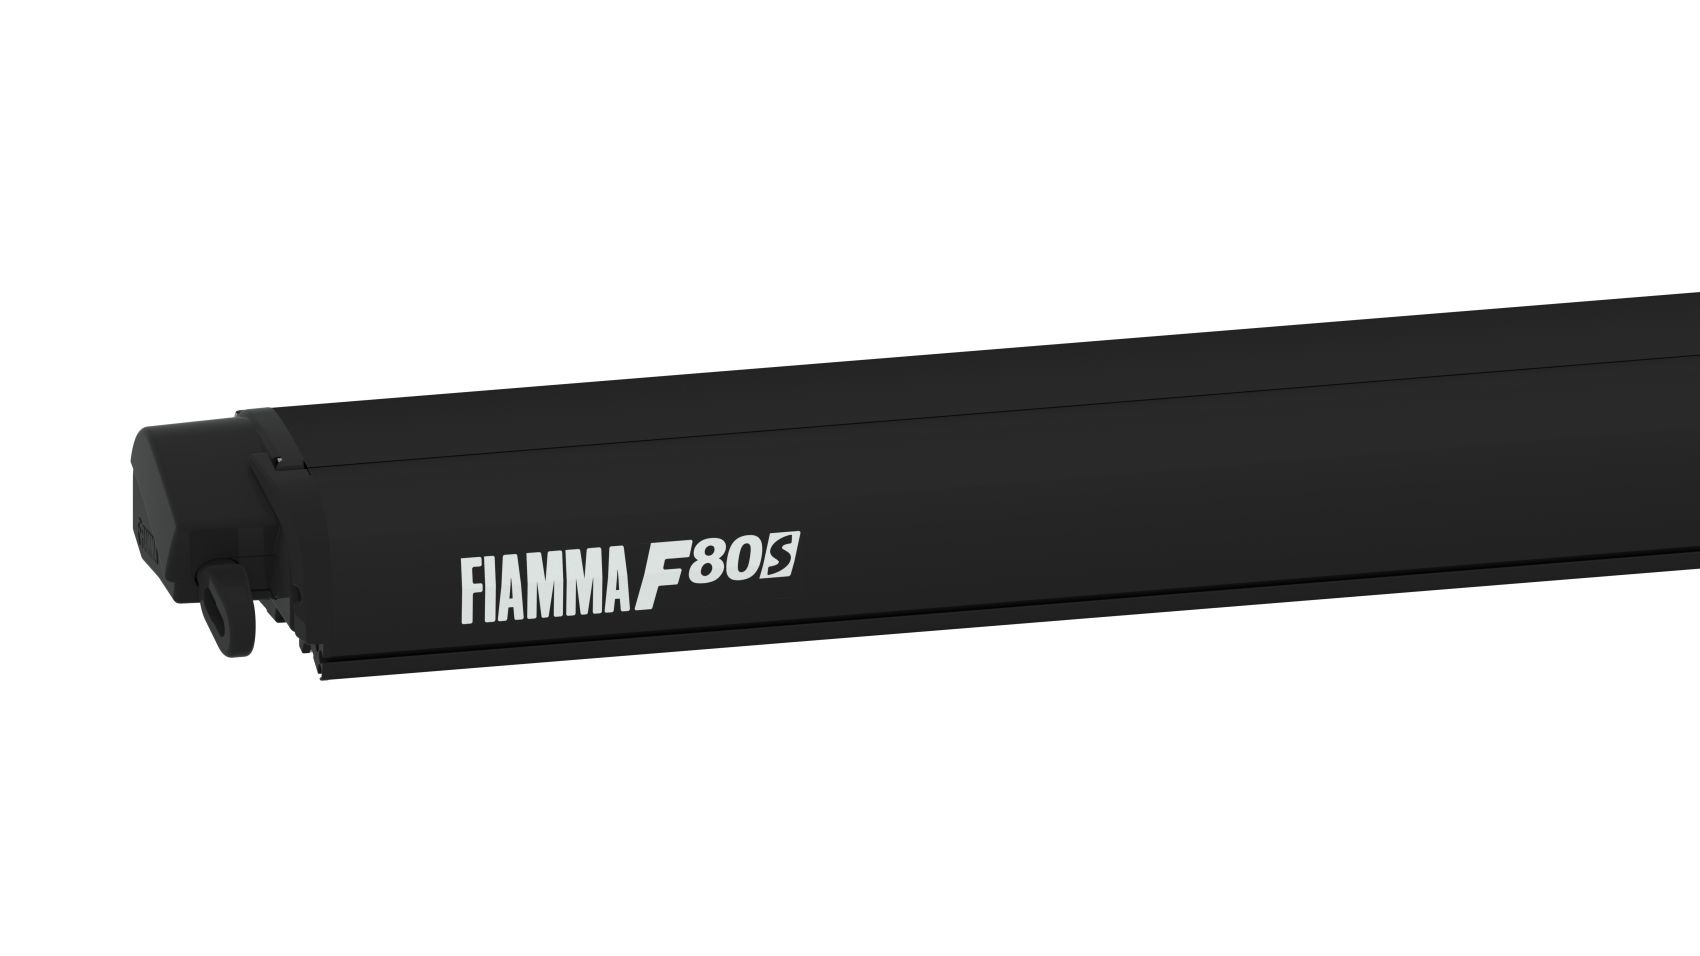 Fiamma F80s Awning for Ducato / Jumper / Boxer